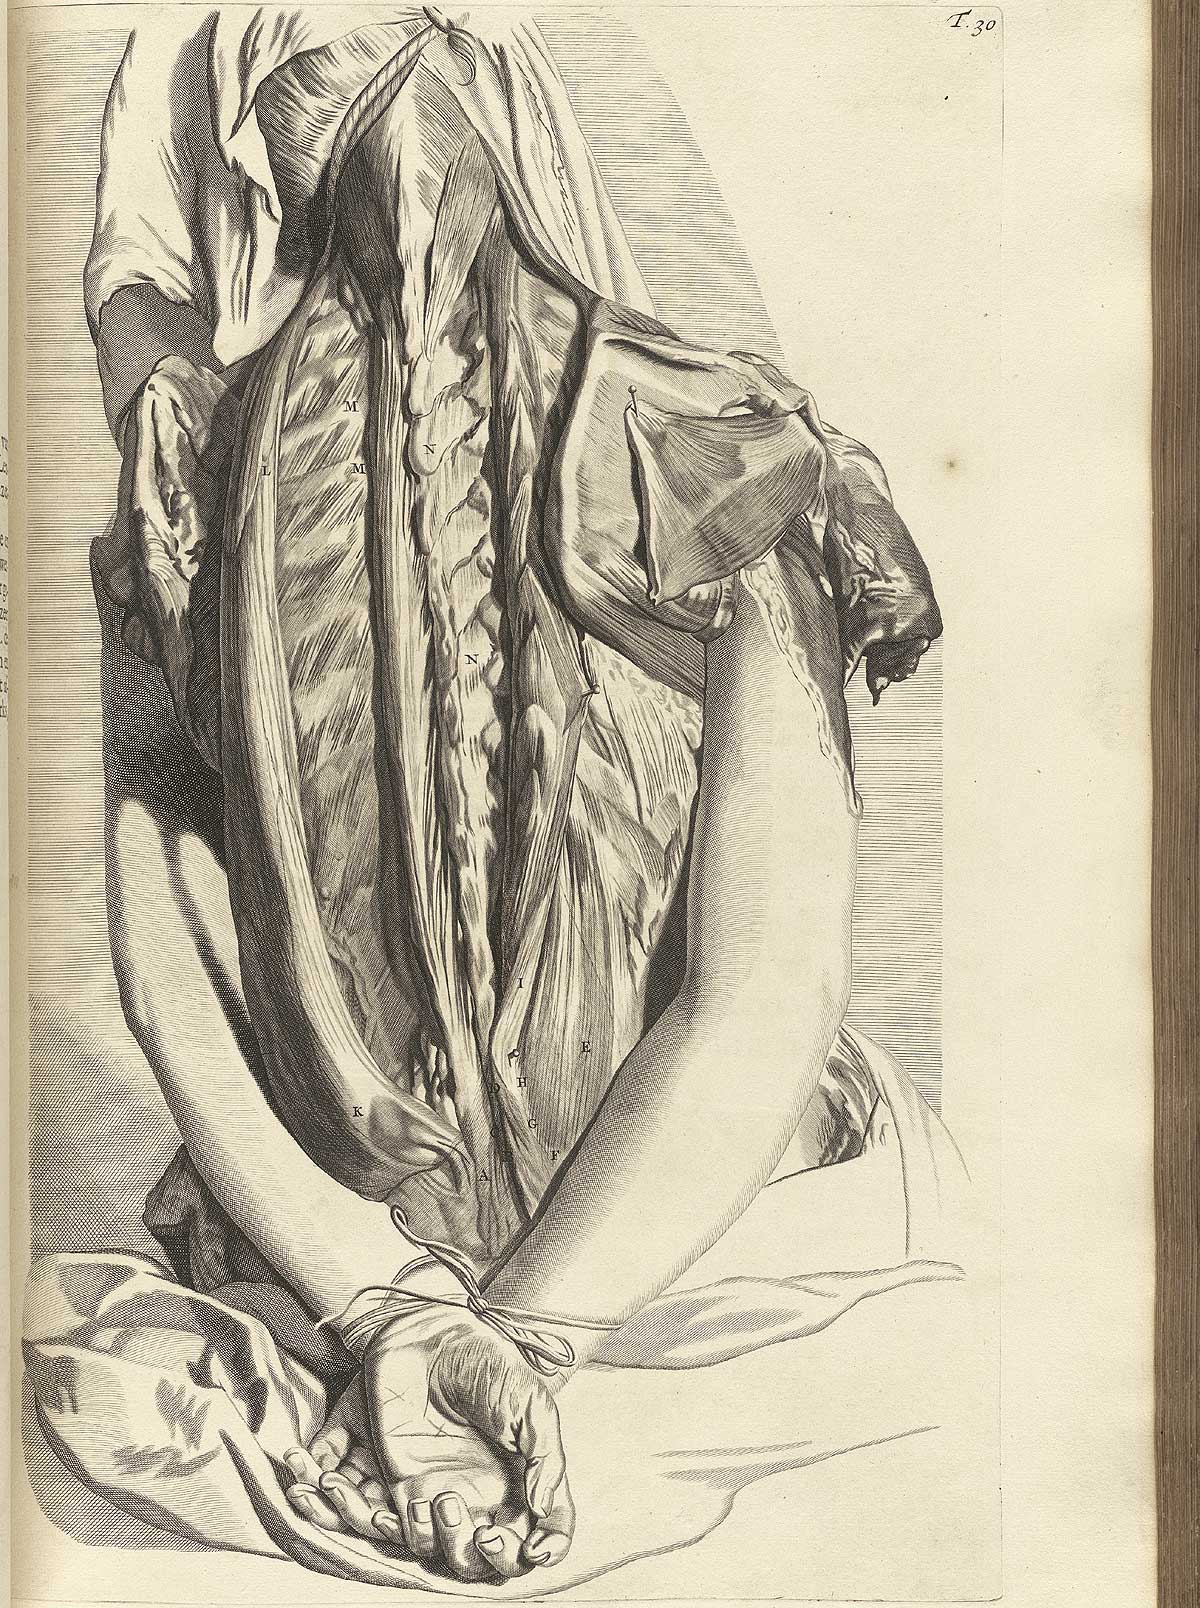 Engraving showing detail of the exposed muscles of the back with emphasis on the muscles surrounding the vertebral column with skin peeled away; the back is that of a female cadaver with sheet over her head sitting upright on the dissection table with a noose holding the body up by the neck, with her hand tied behind her back; from Govard Bidloo’s Ontleding Des Menschelyken Lichaams, Amsterdam, 1690, NLM Call no. WZ 250 B5855anDu 1690.